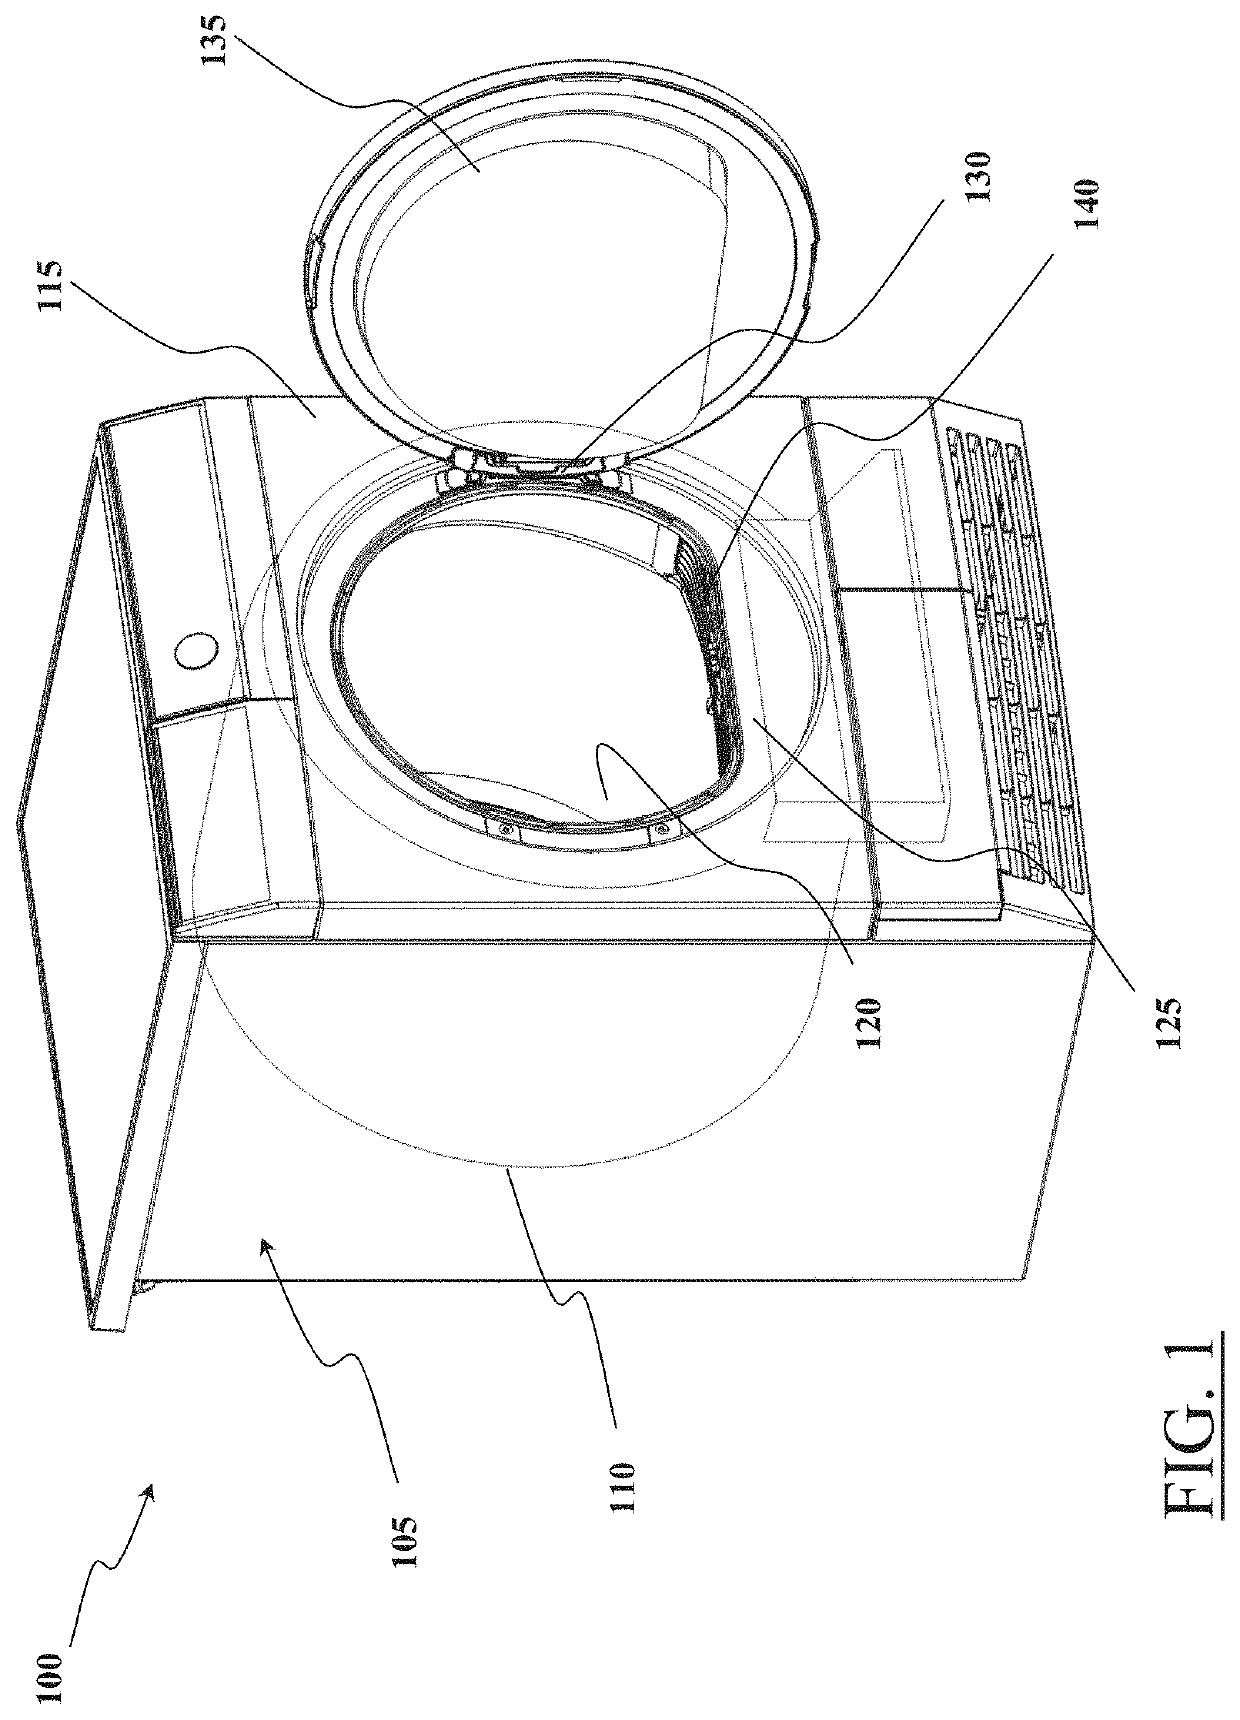 Laundry appliance with capacitive laundry drying degree sensing function